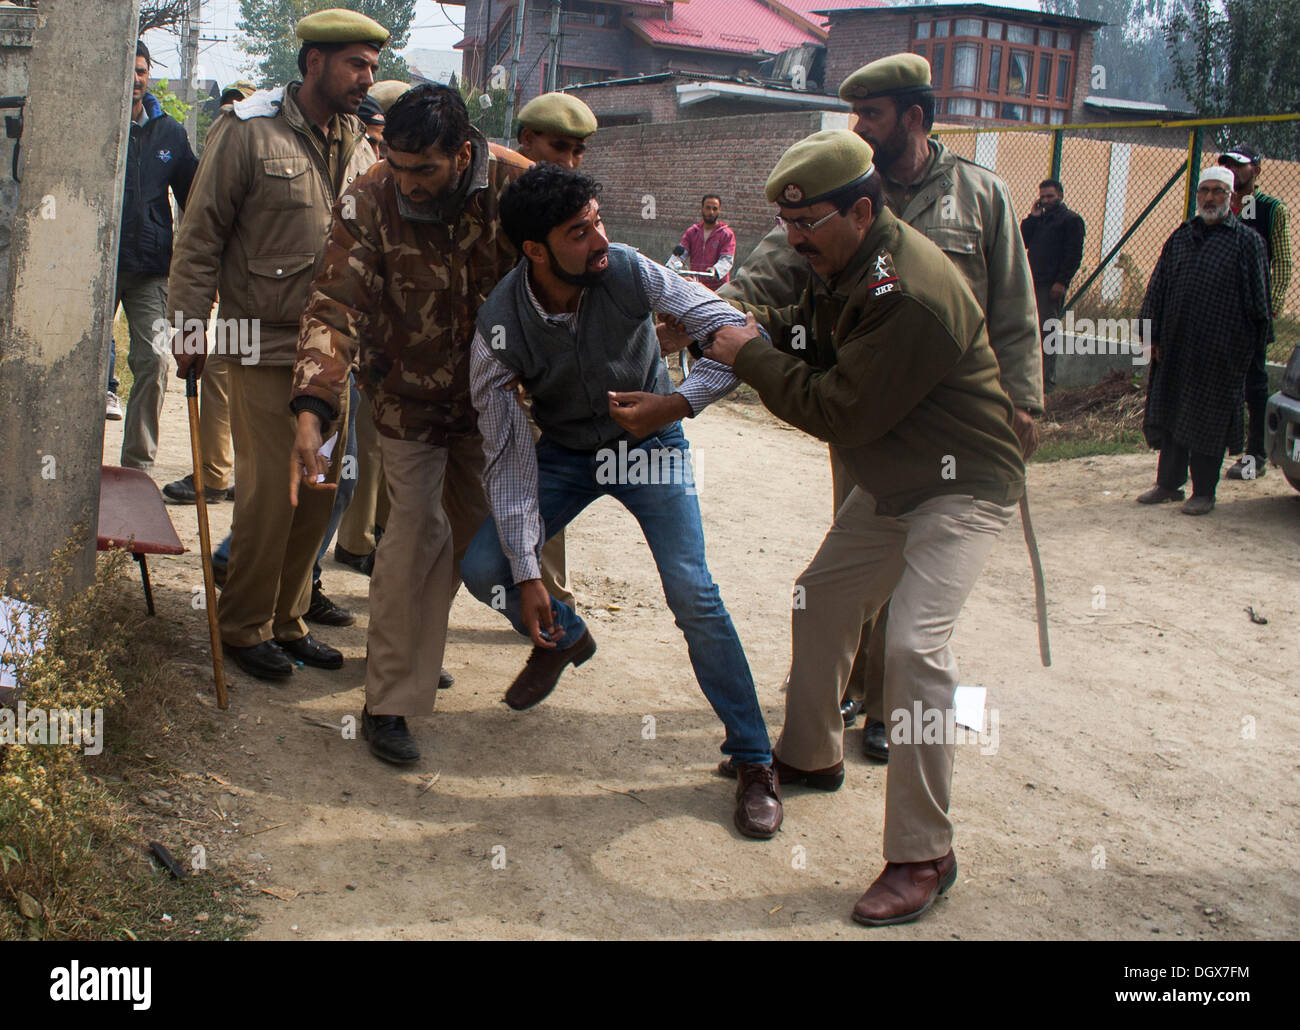 Srinagar, Indian Administered Kashmir 27 october 2013. An Indian policeman arrests a supporter of Shabir Ahmad Shah a separatist leader  during an Indian protest in Srinagar the summer capital of indian adminstered kashmir ,india . Large number of Indian troops were deployed to thwart anti-Indian protests in Kashmir. Indian troops landed in Kashmir  on  27 October  in kashmir  in 1947 A shutdown called by many resistance groups against the landing of the Indian army in Jammu and Kashmir this day in 1947 is being observed on Sunday.. (Sofi Suhail/ Alamy Live News) Stock Photo